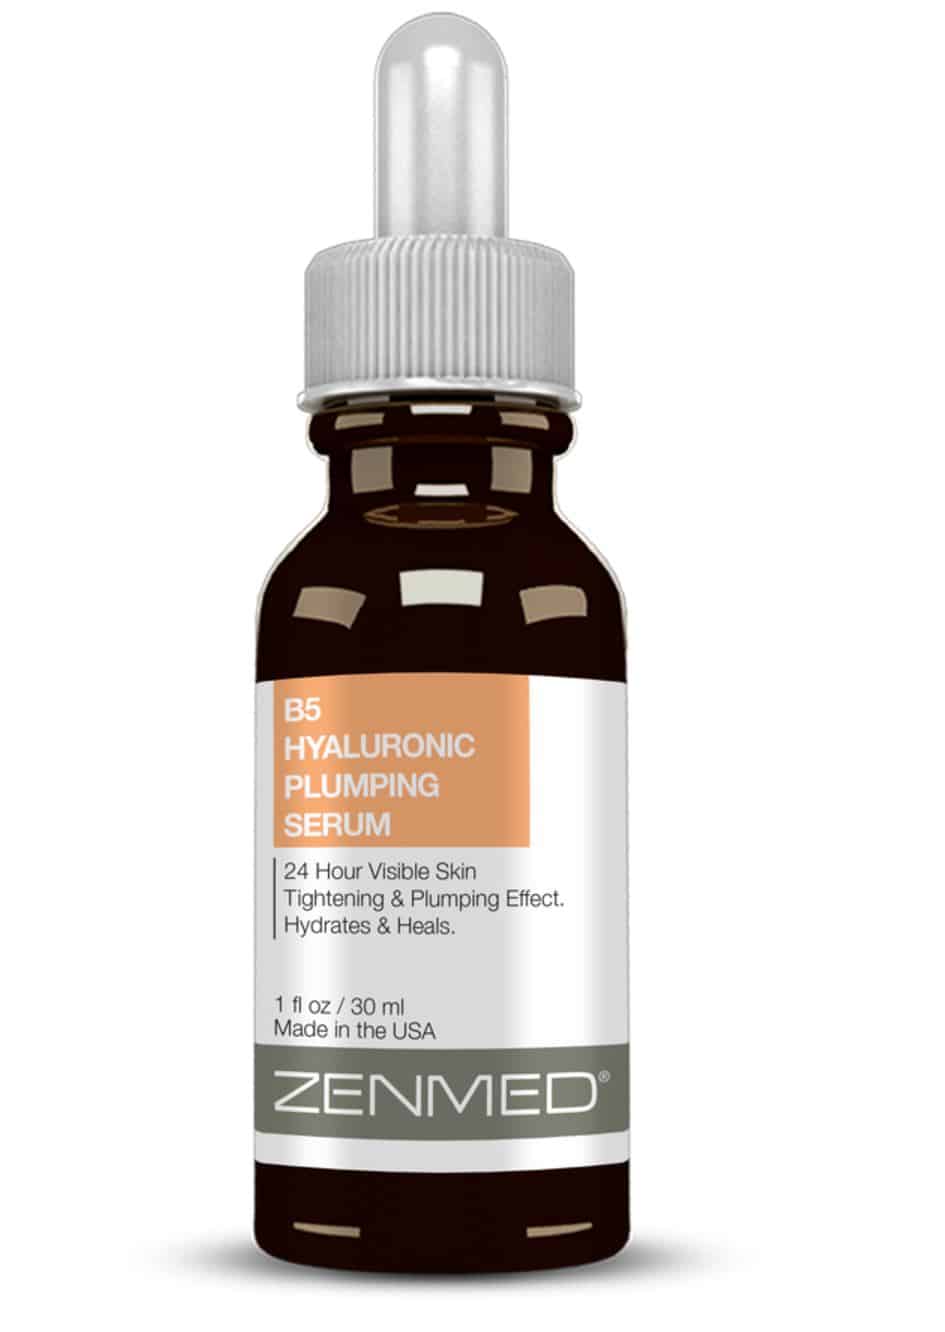 Zenmed facial products